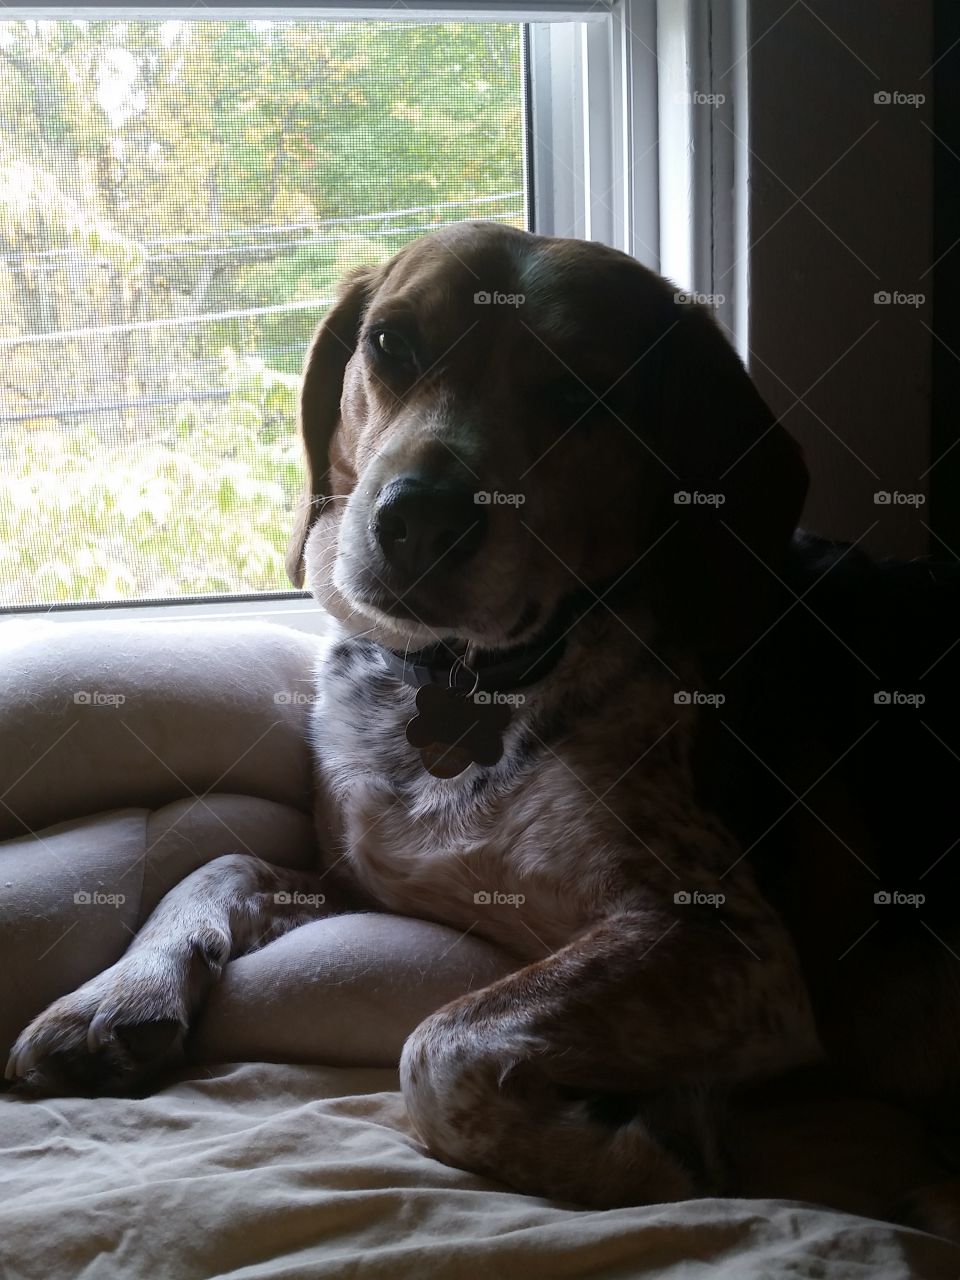 our Beagle in front of his favorite window